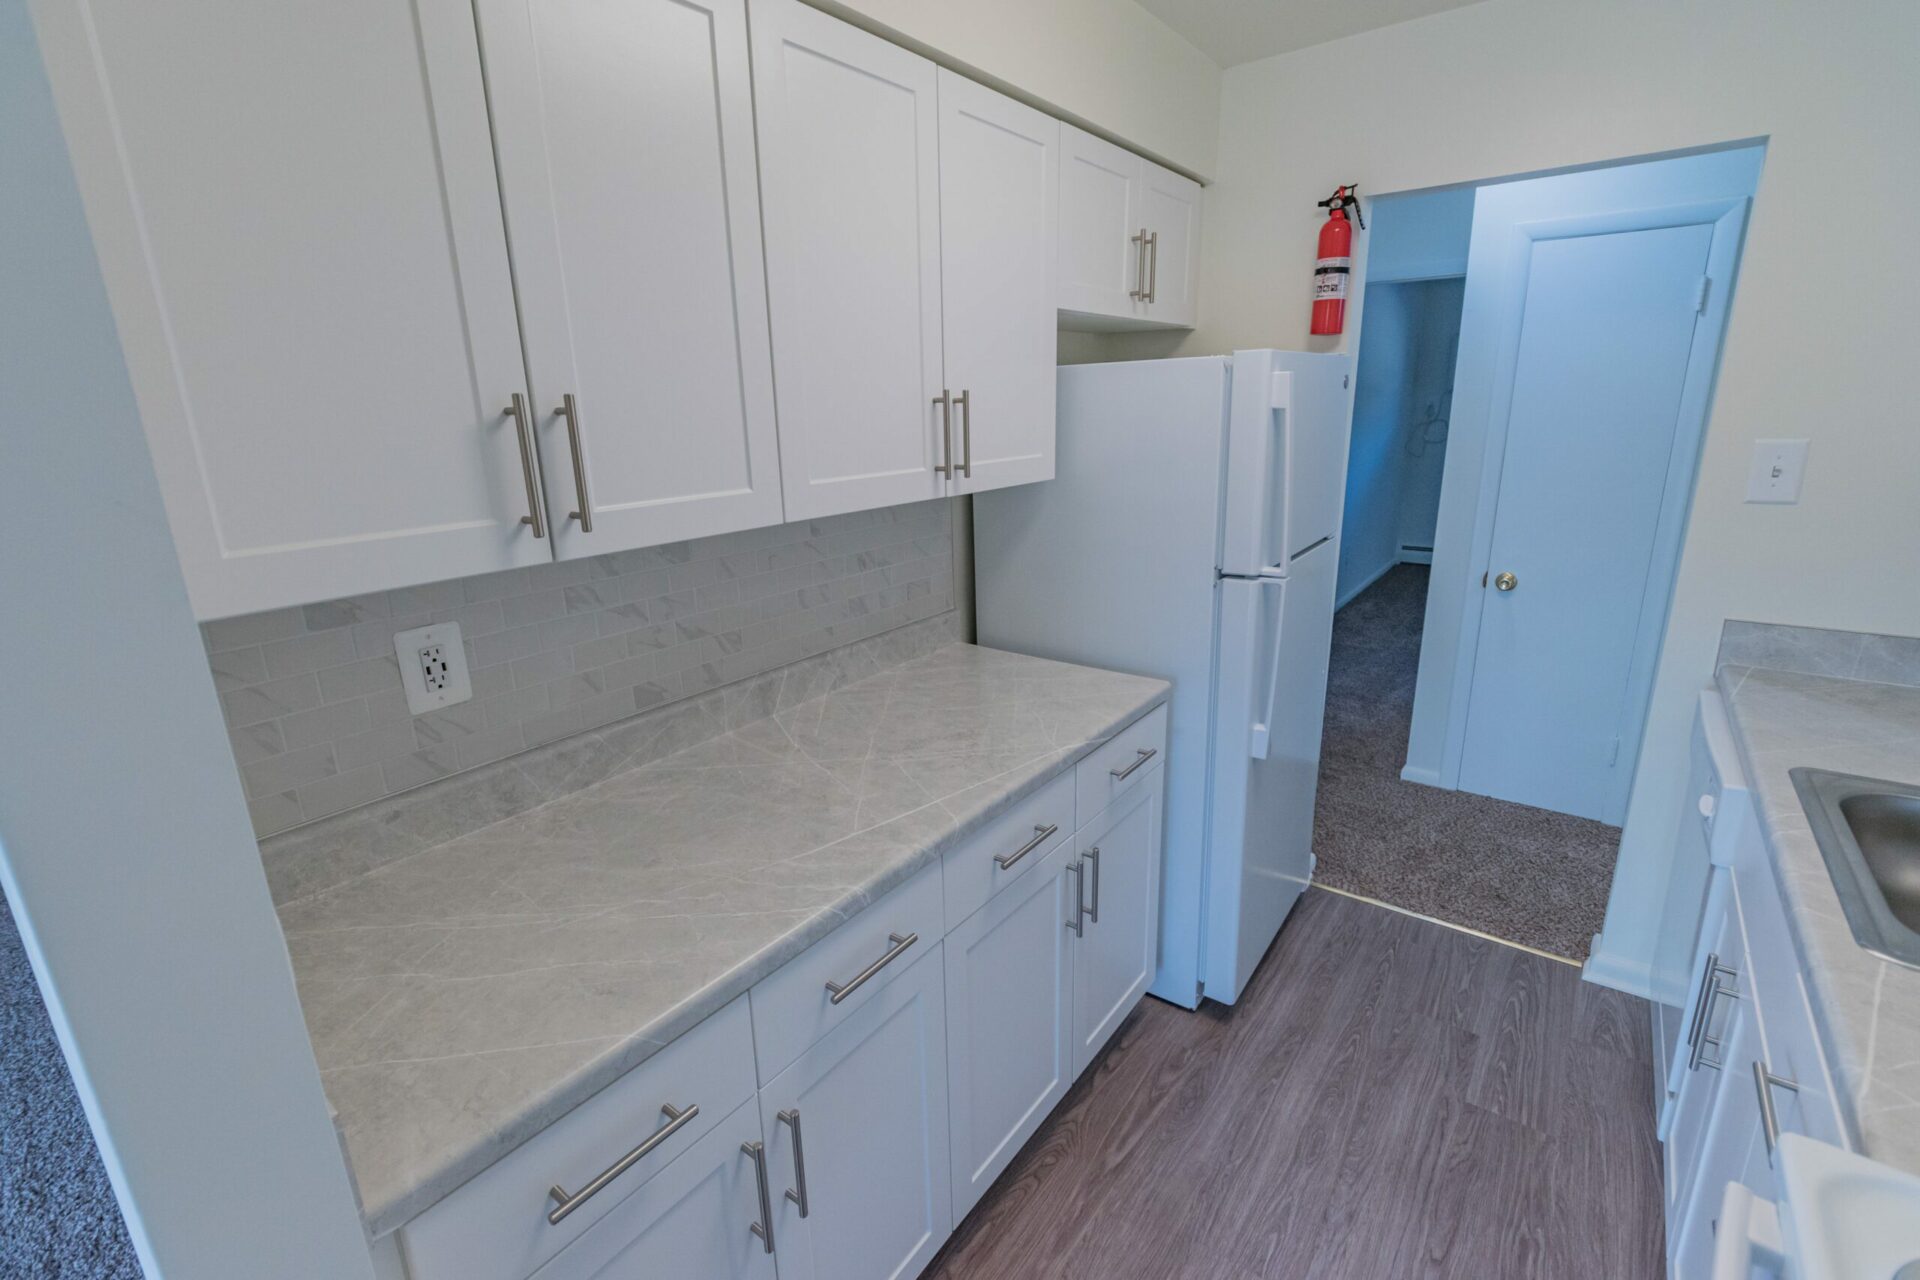 Kitchen area of an apartment, fitted vinyl flooring, a marble counter, a fridge, and a fire extinguisher